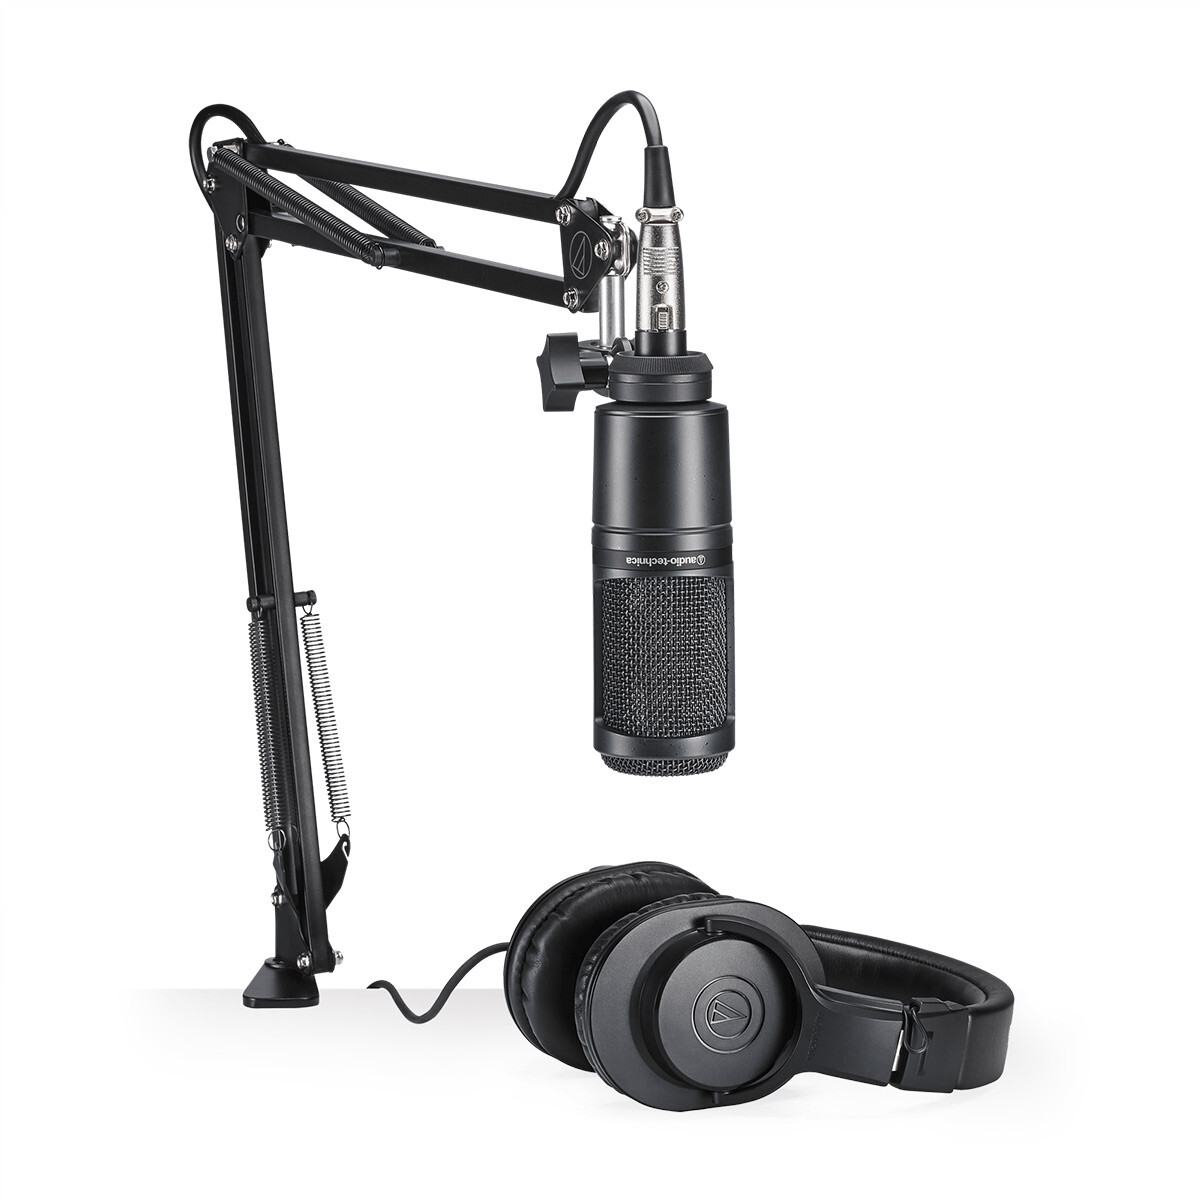 PACK PARA STREAMING AUDIO TECHNICA MIC 2020 Y AURICULAR M20X 